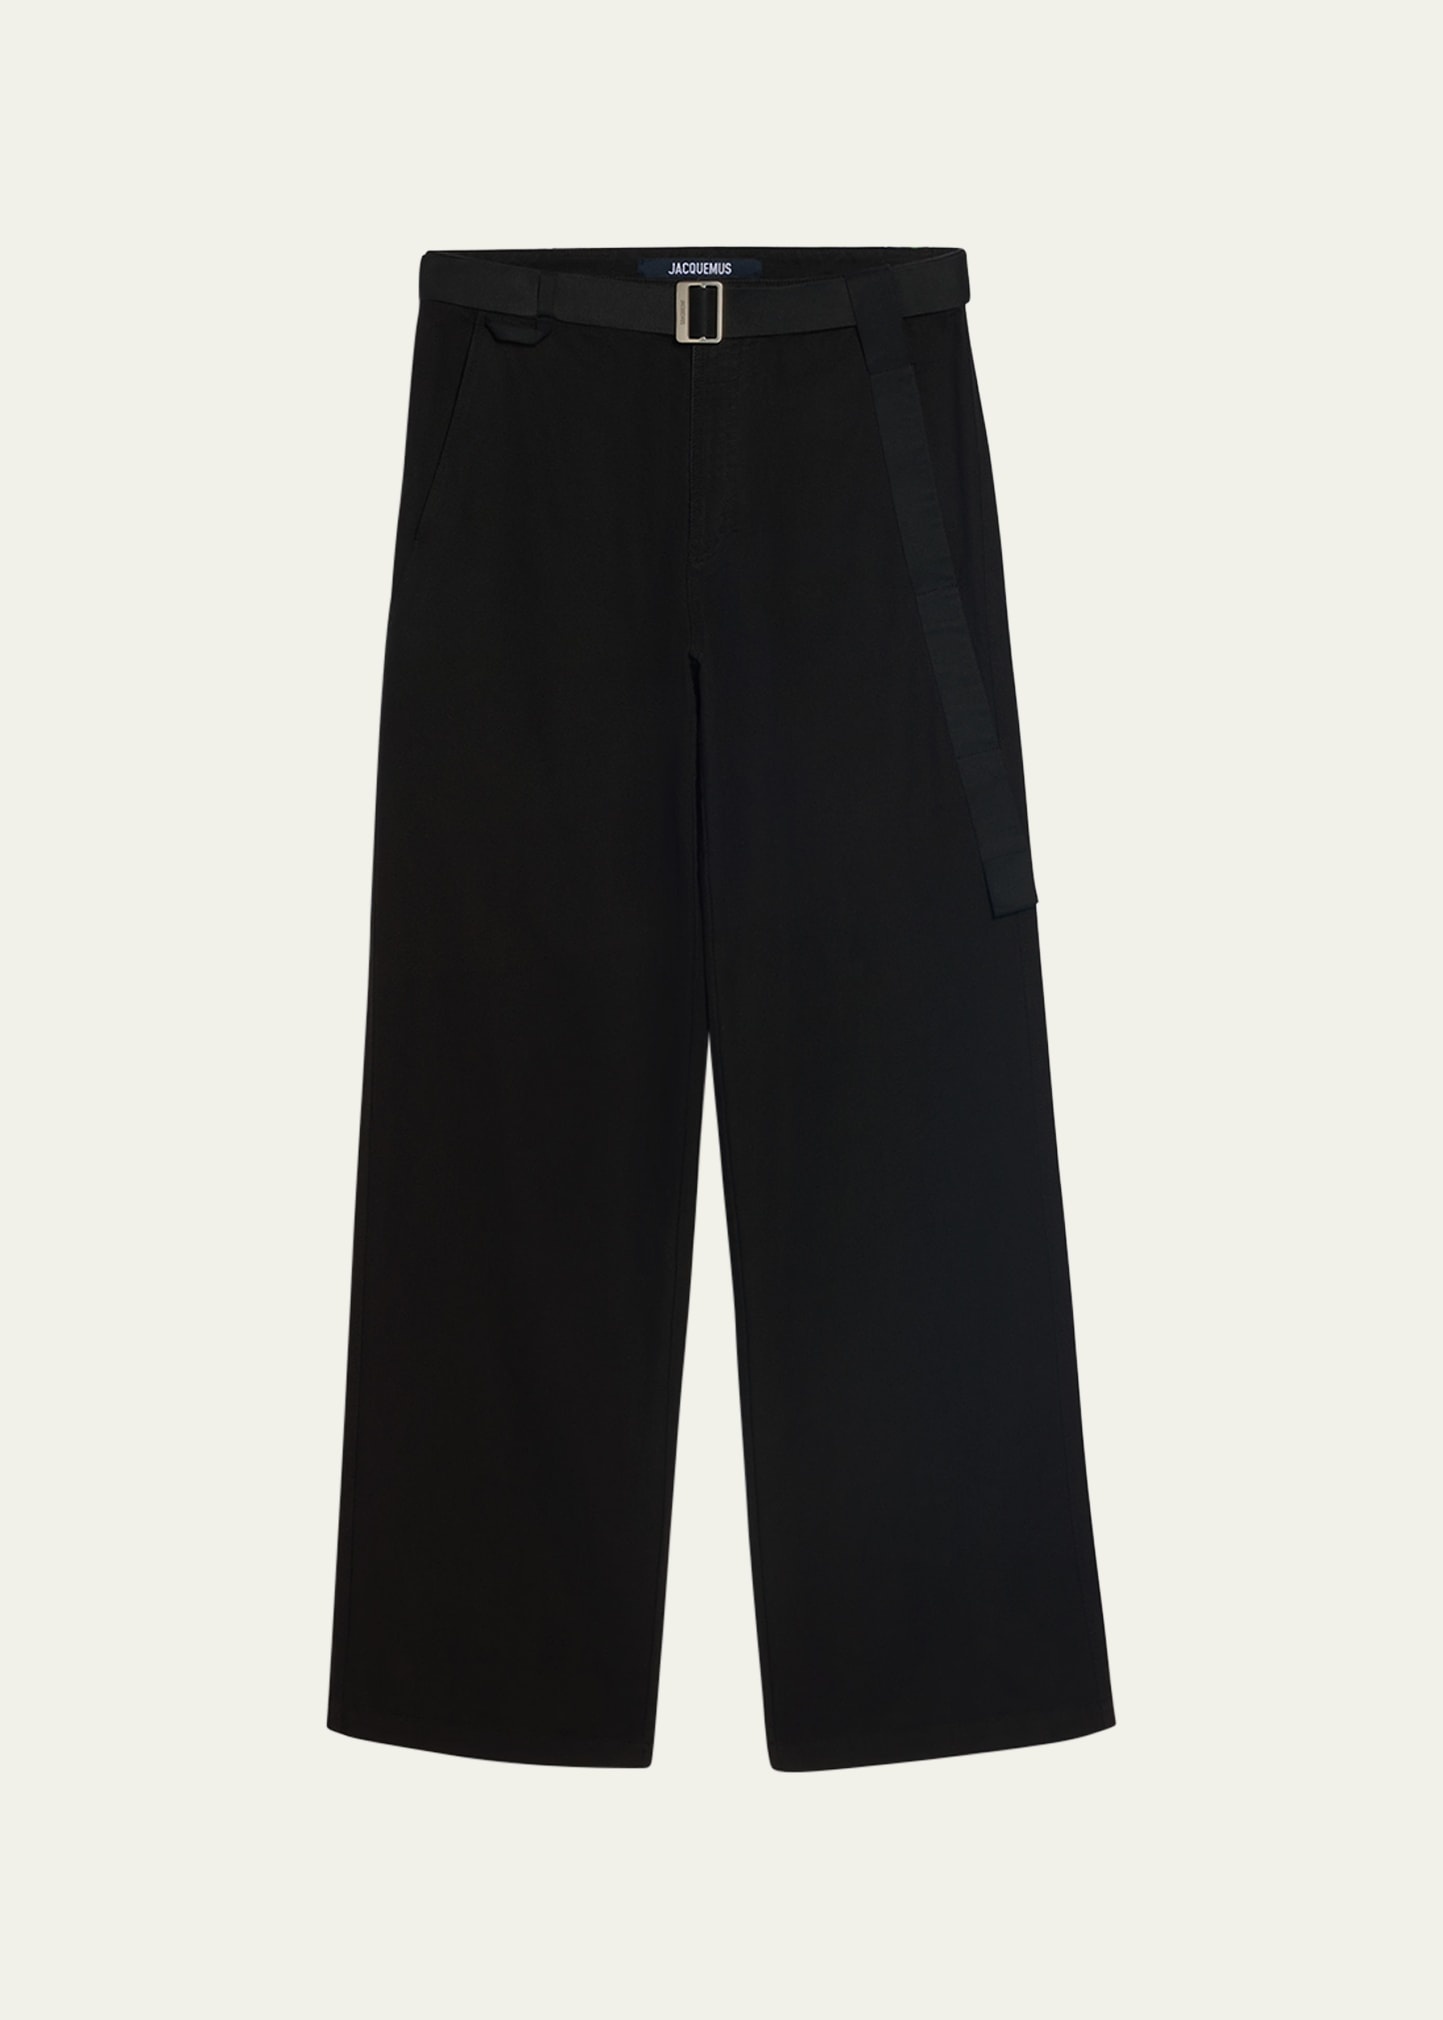 Men's Belted Straight Cotton Pants - 1